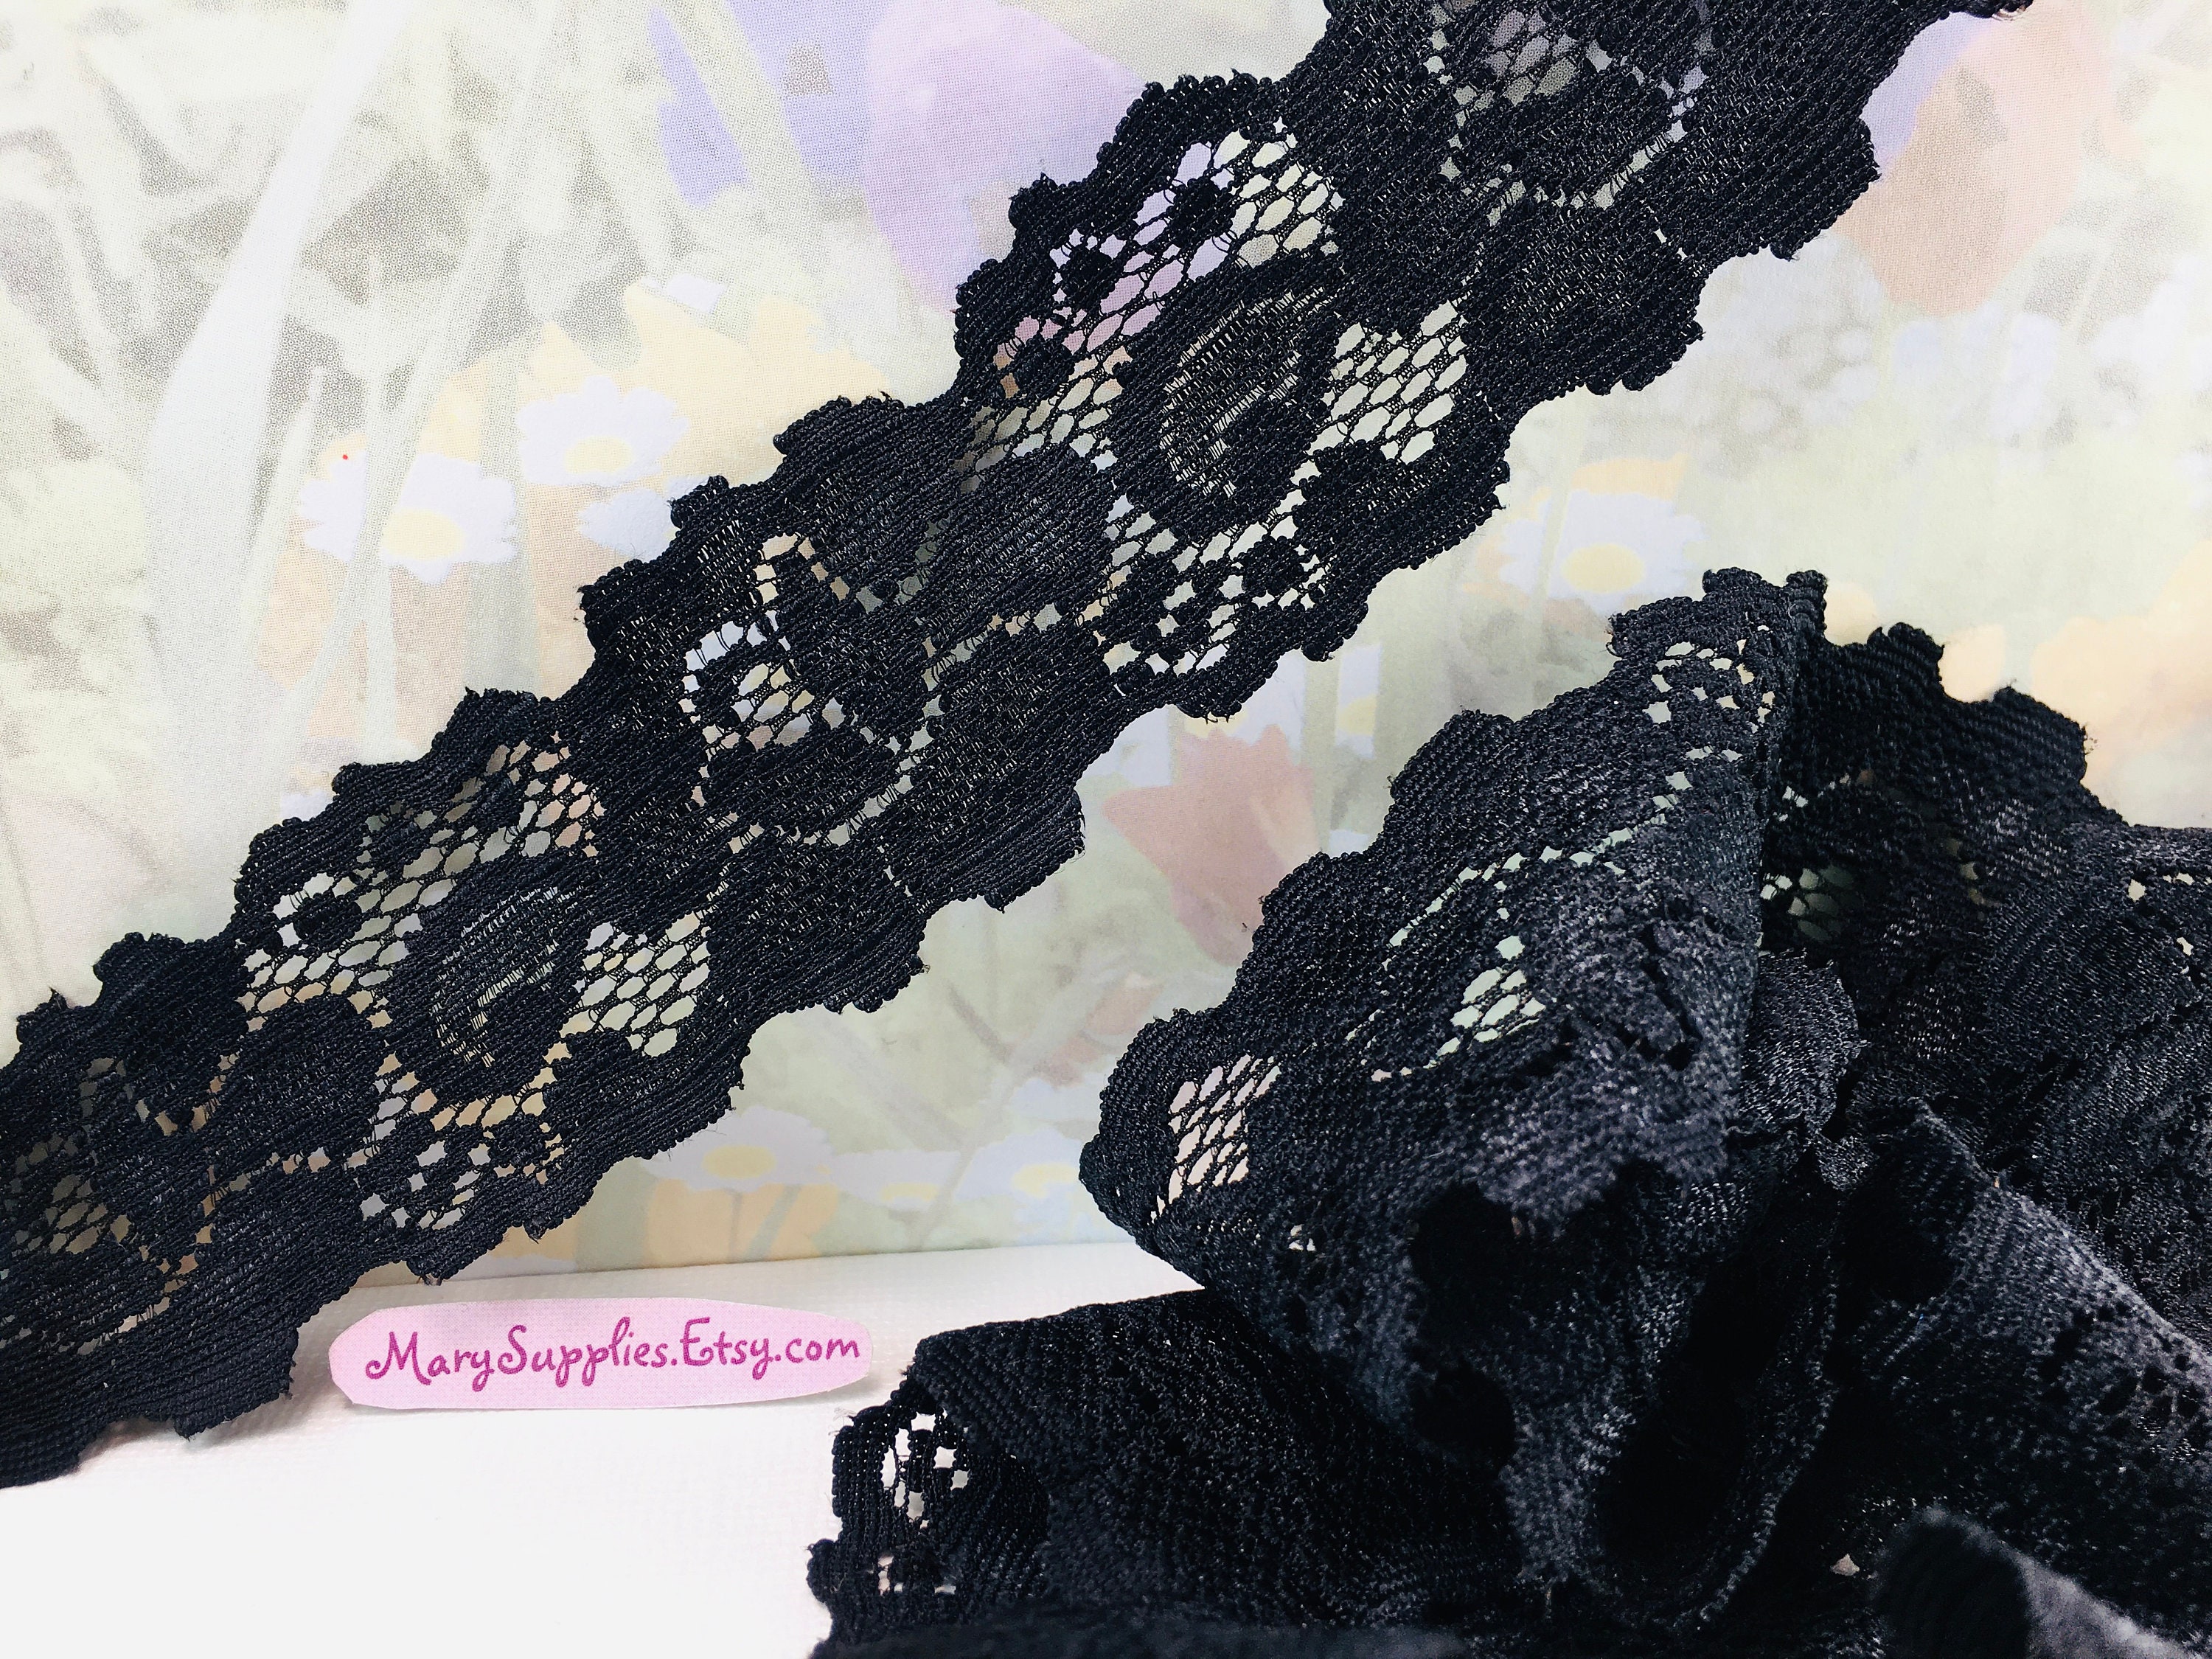 Black Scalloped Beaded Edge Hand Lace 52” Wide